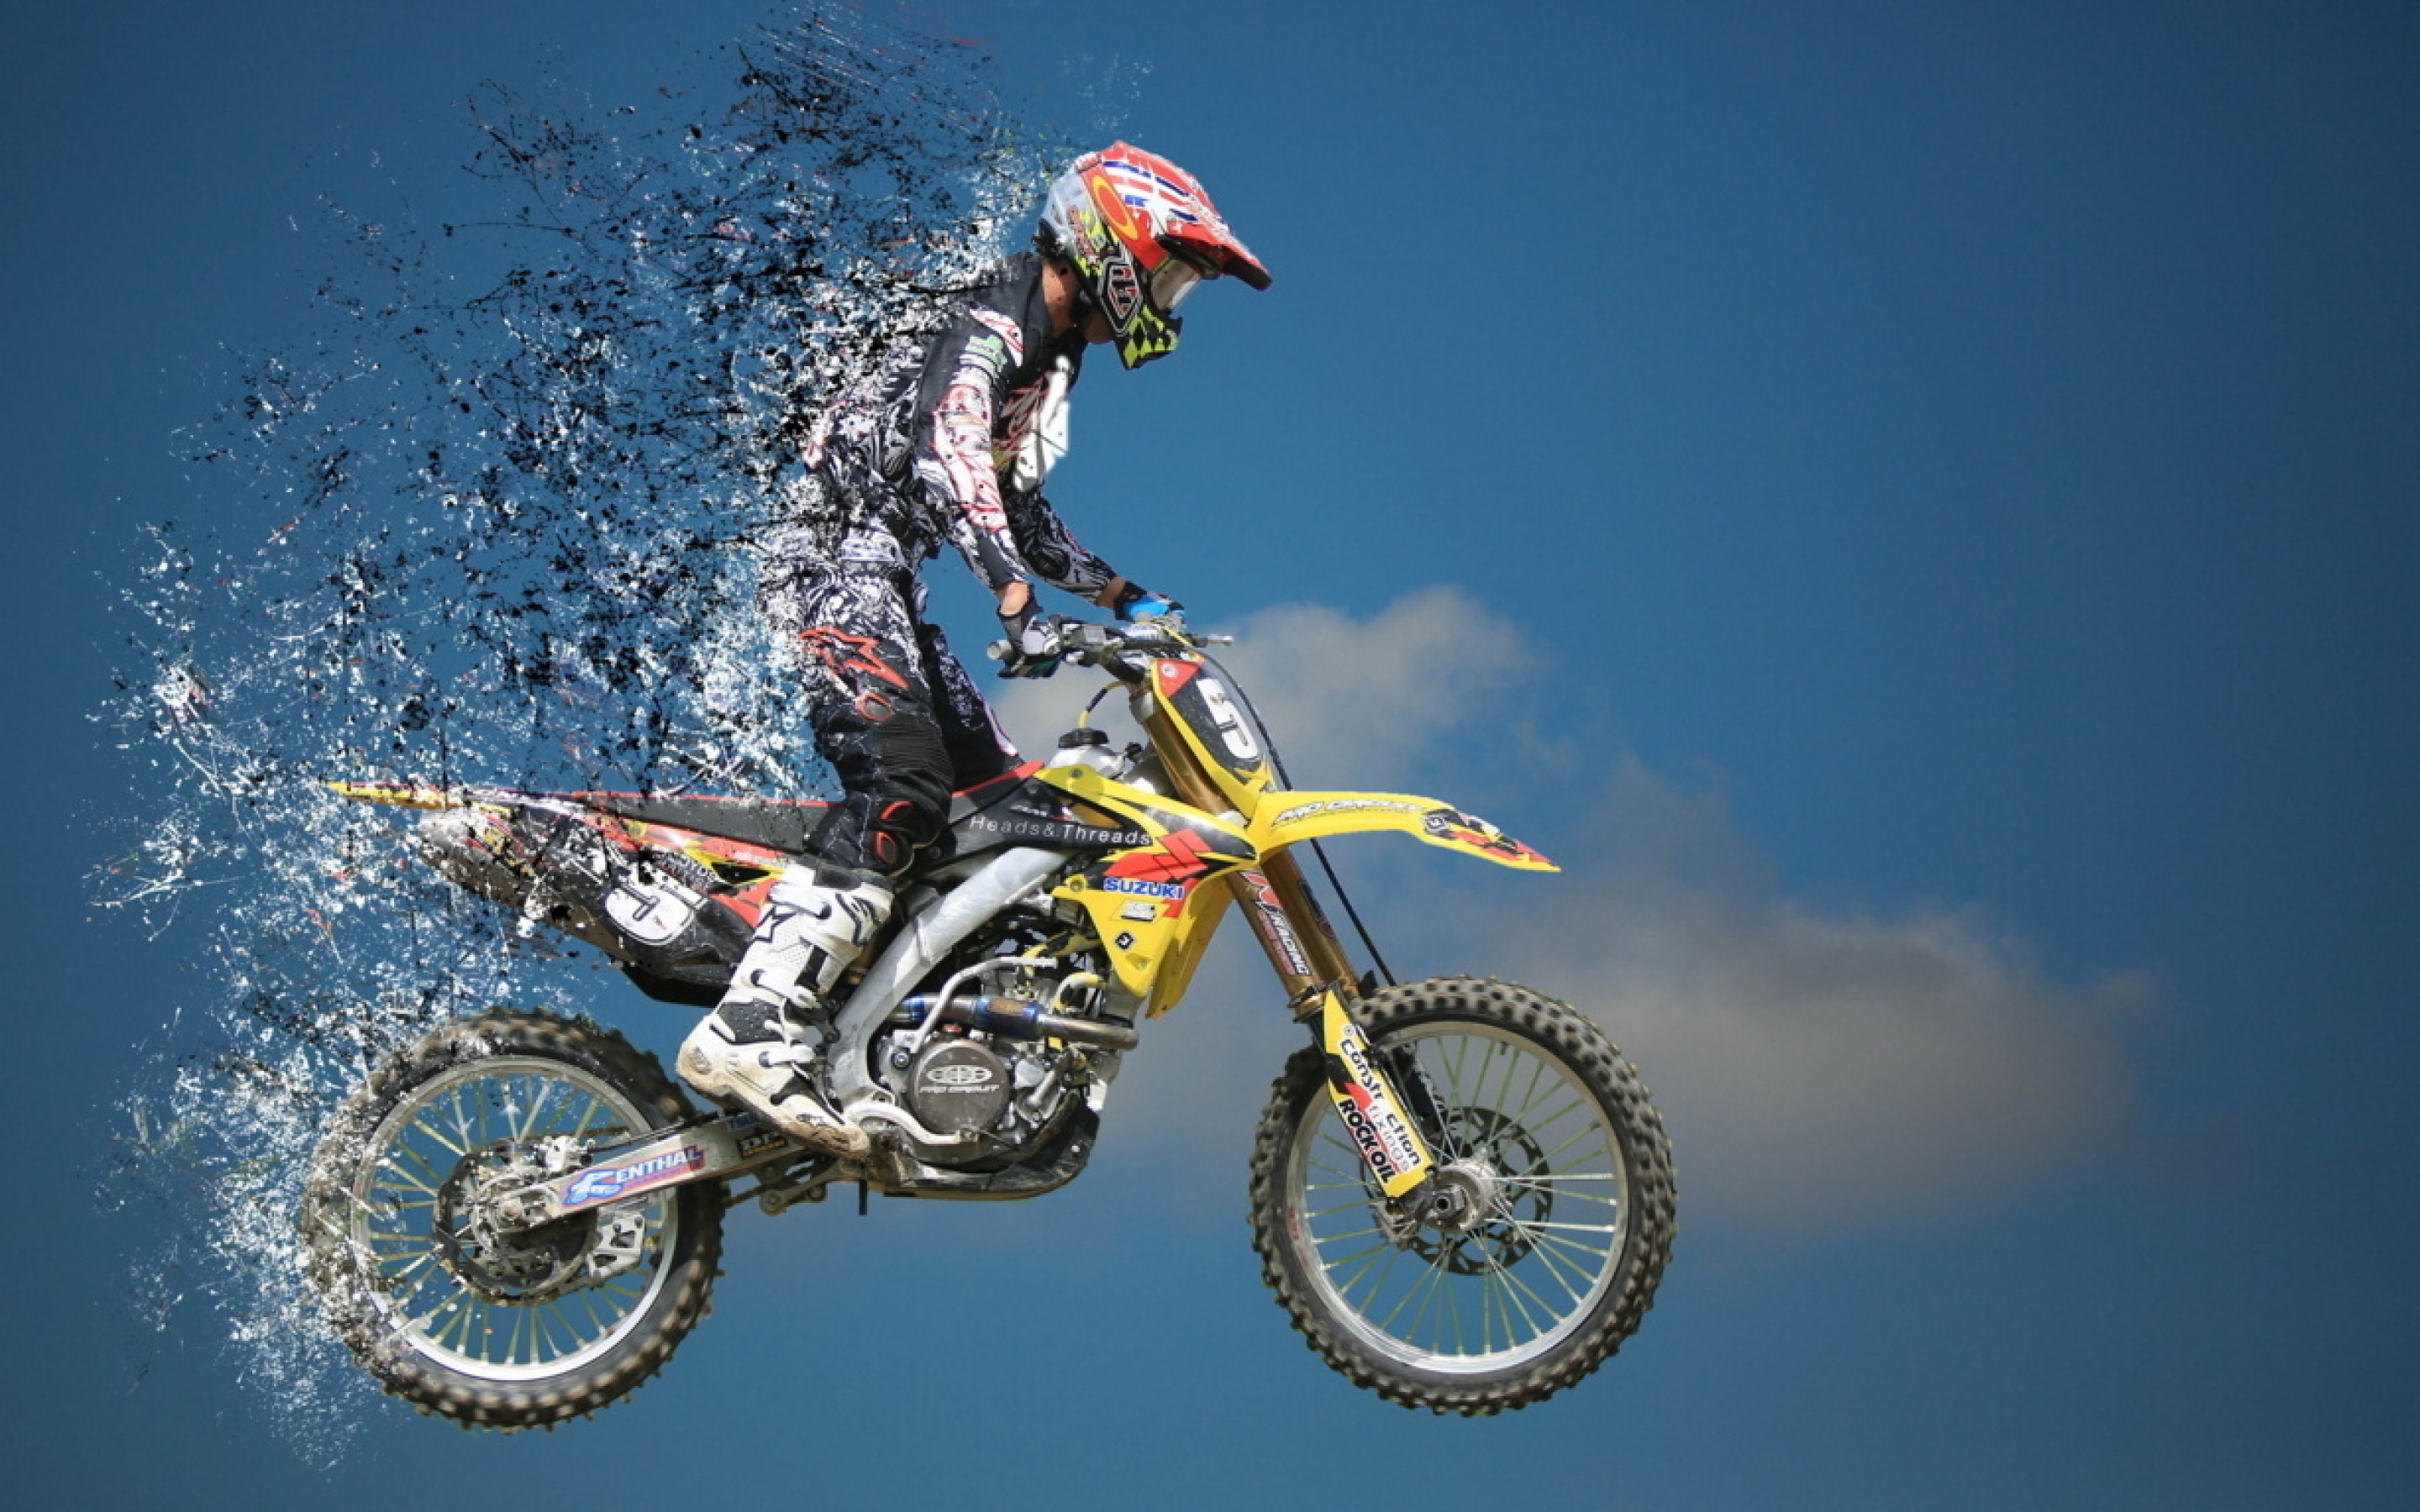 Stunt Background For Pc HD Cool Image